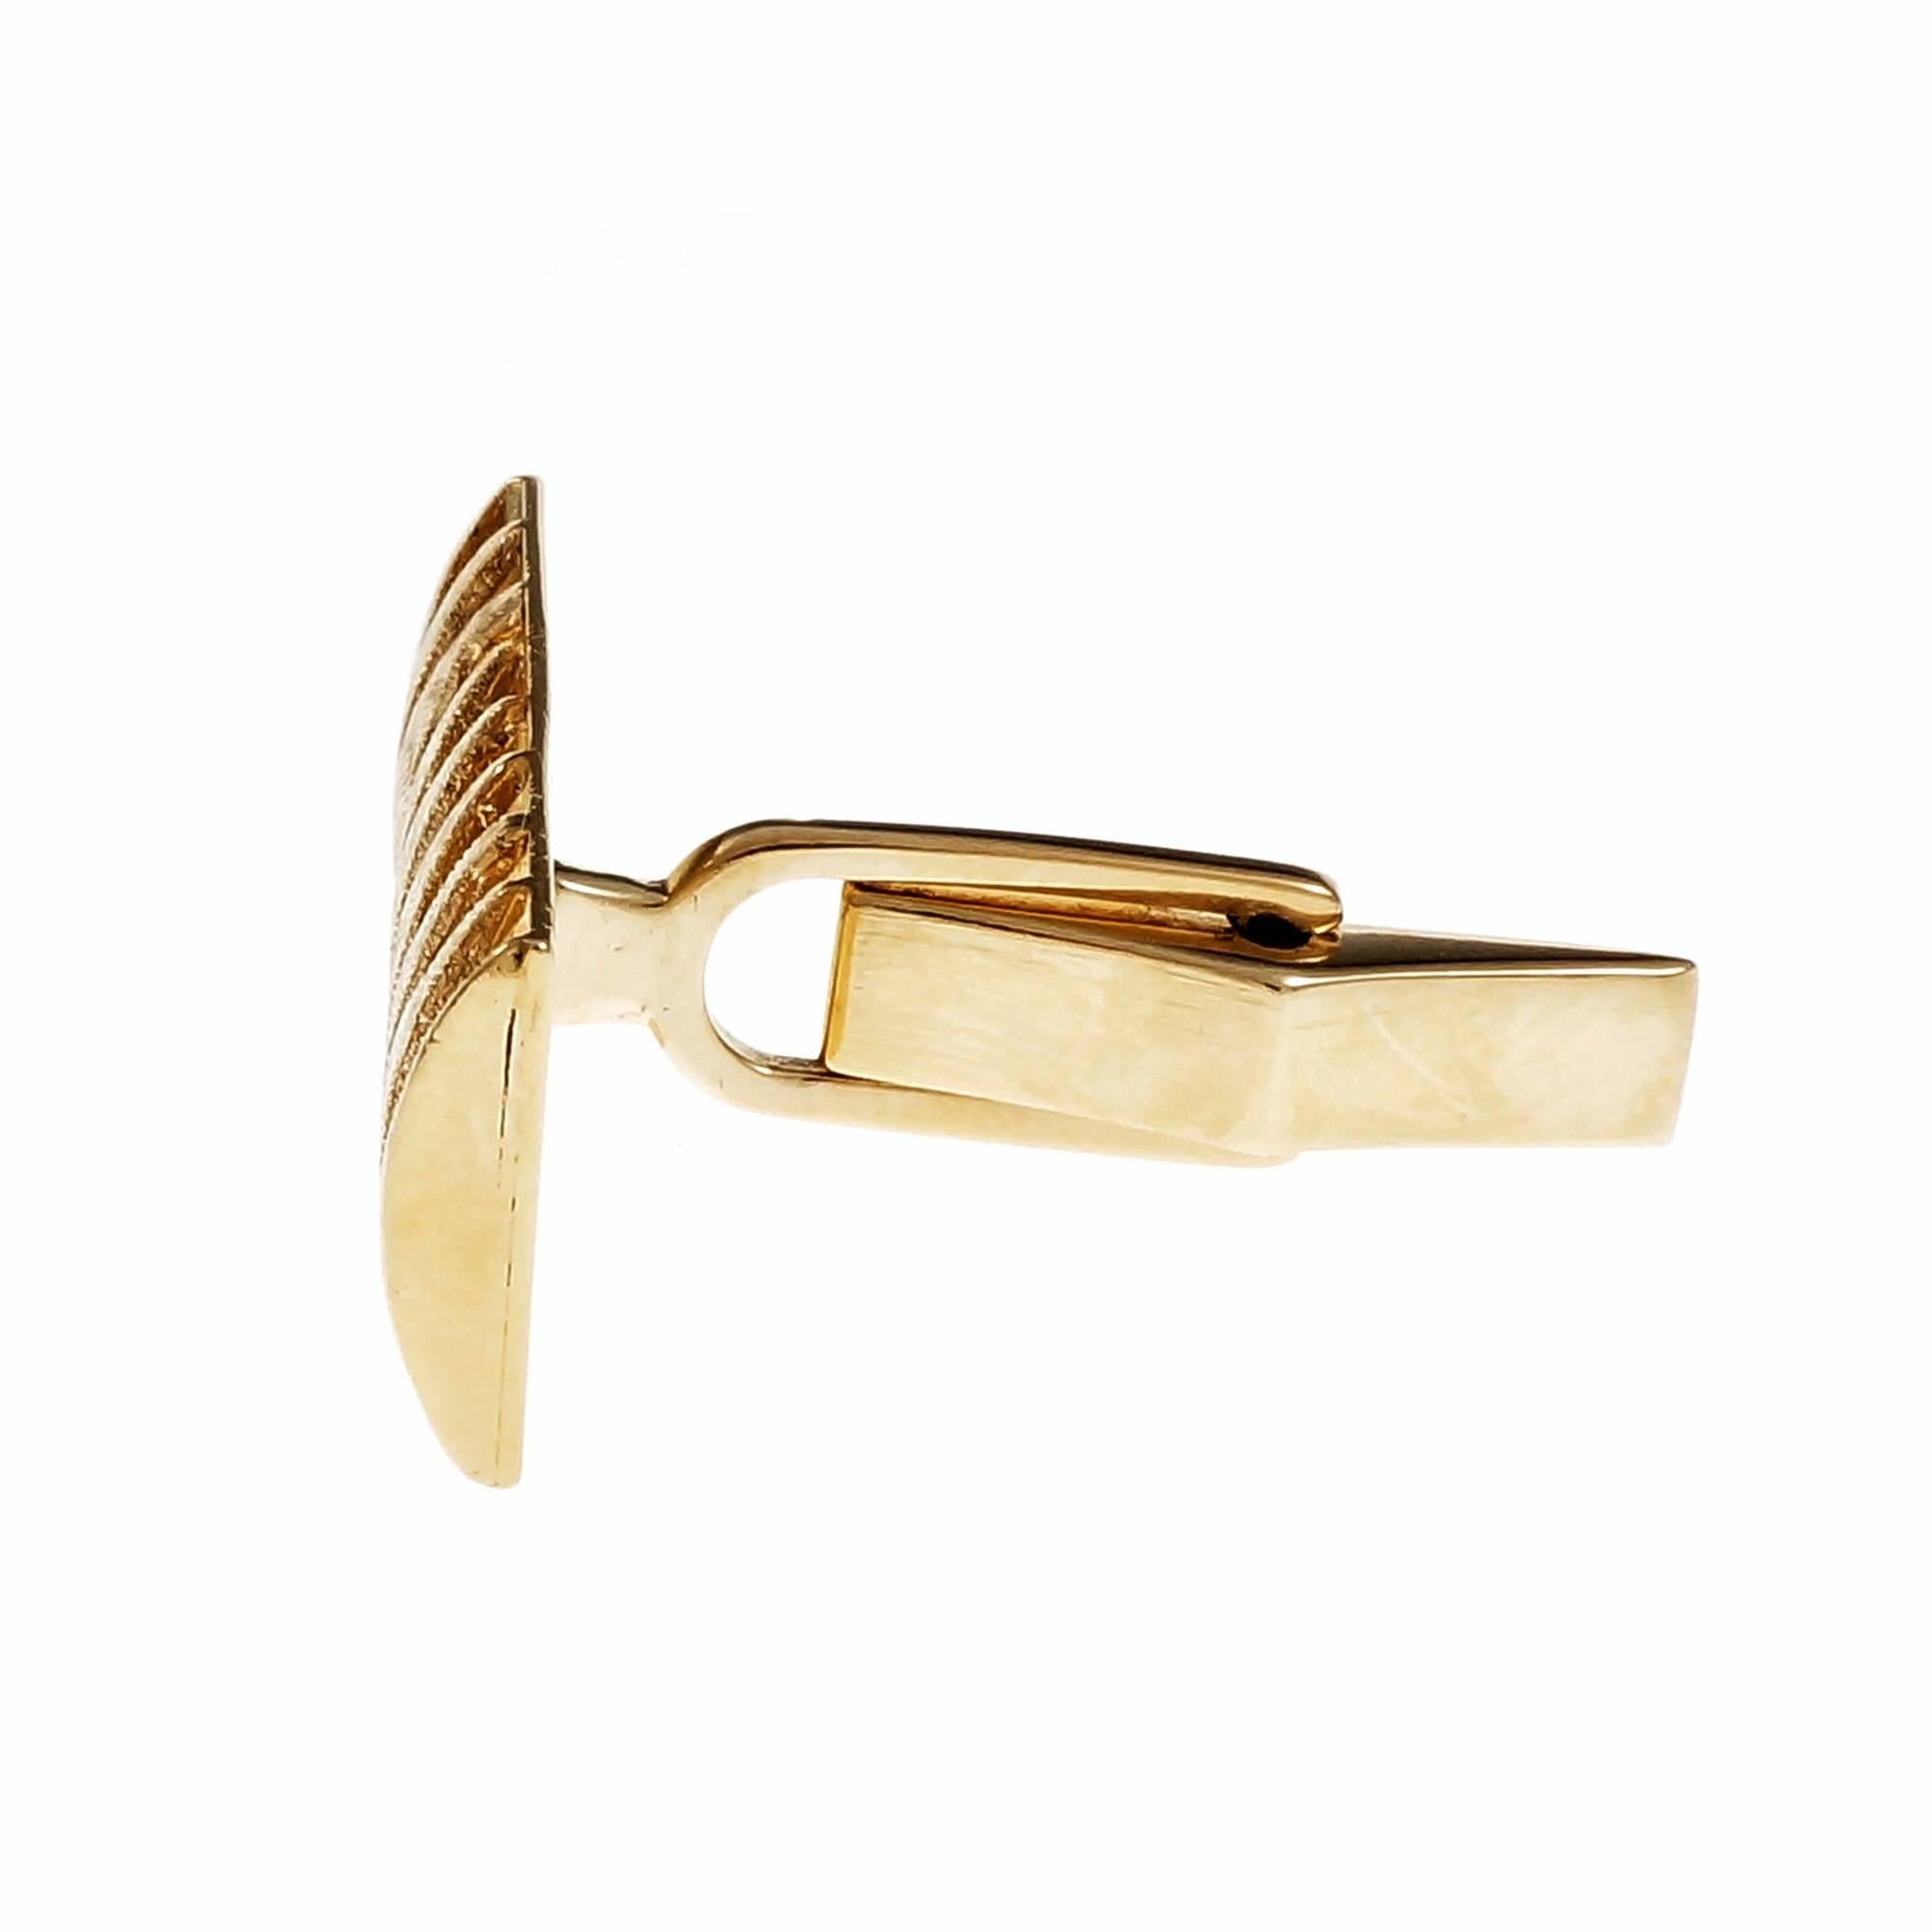 1950 hand textured two-dimensional rectangular clip back cufflinks.

14k yellow gold
Tested and stamped: 14k
Hallmark: MJ R
10.1 grams
Top to bottom: 11.7mm or .46 inch
Width: 24.20mm or .95 inch
Depth: 3.11mm
